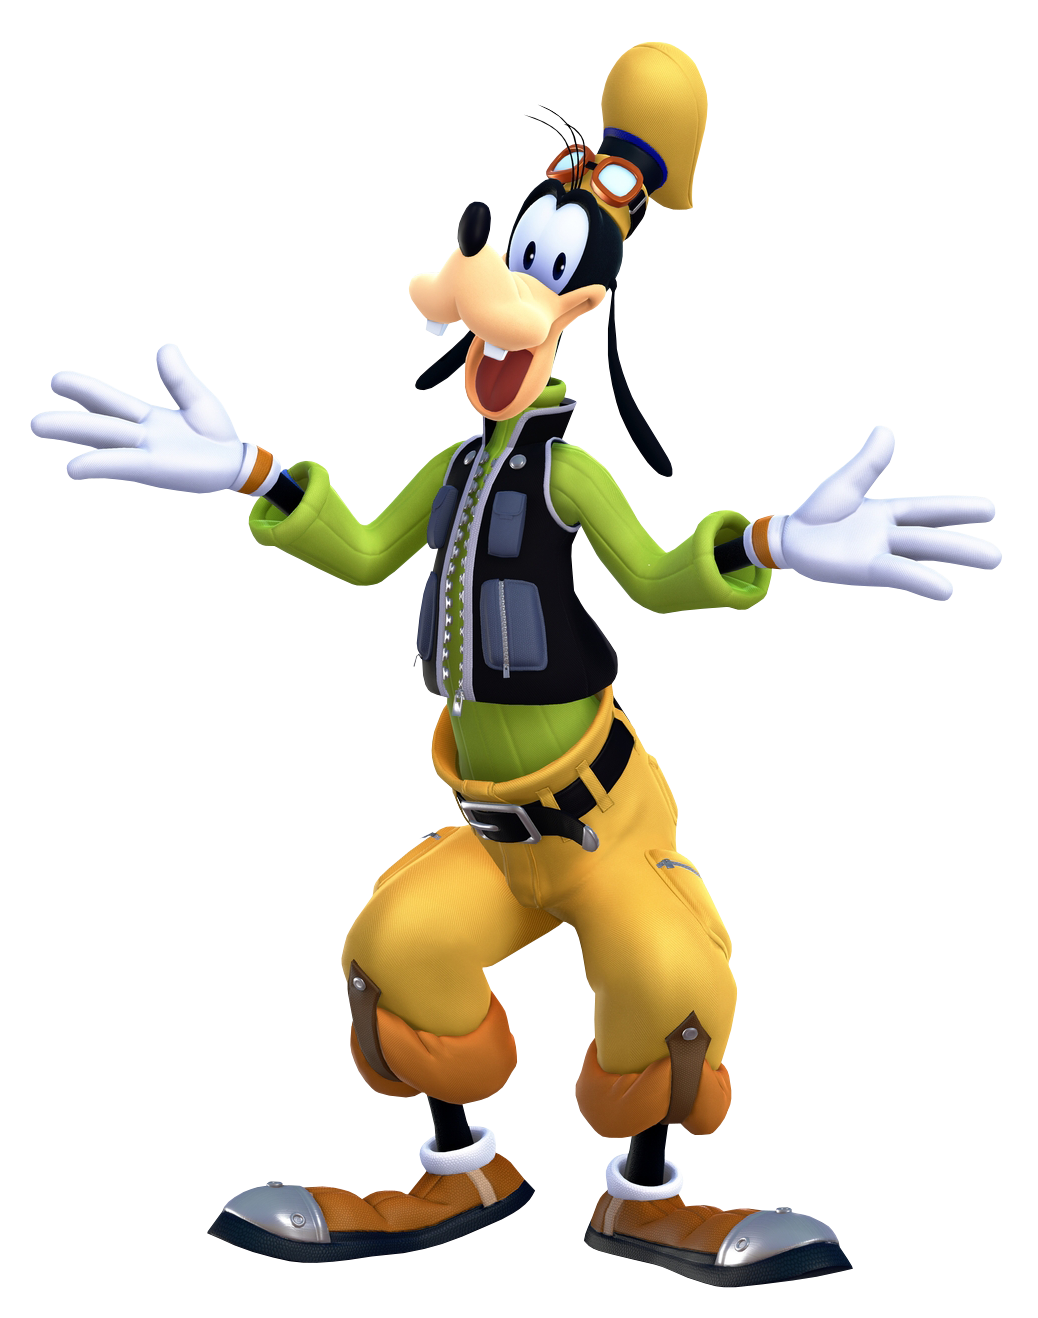 https://static.wikia.nocookie.net/disney/images/0/06/Goofy_KHIII_02.png/revision/latest?cb=20201026015622